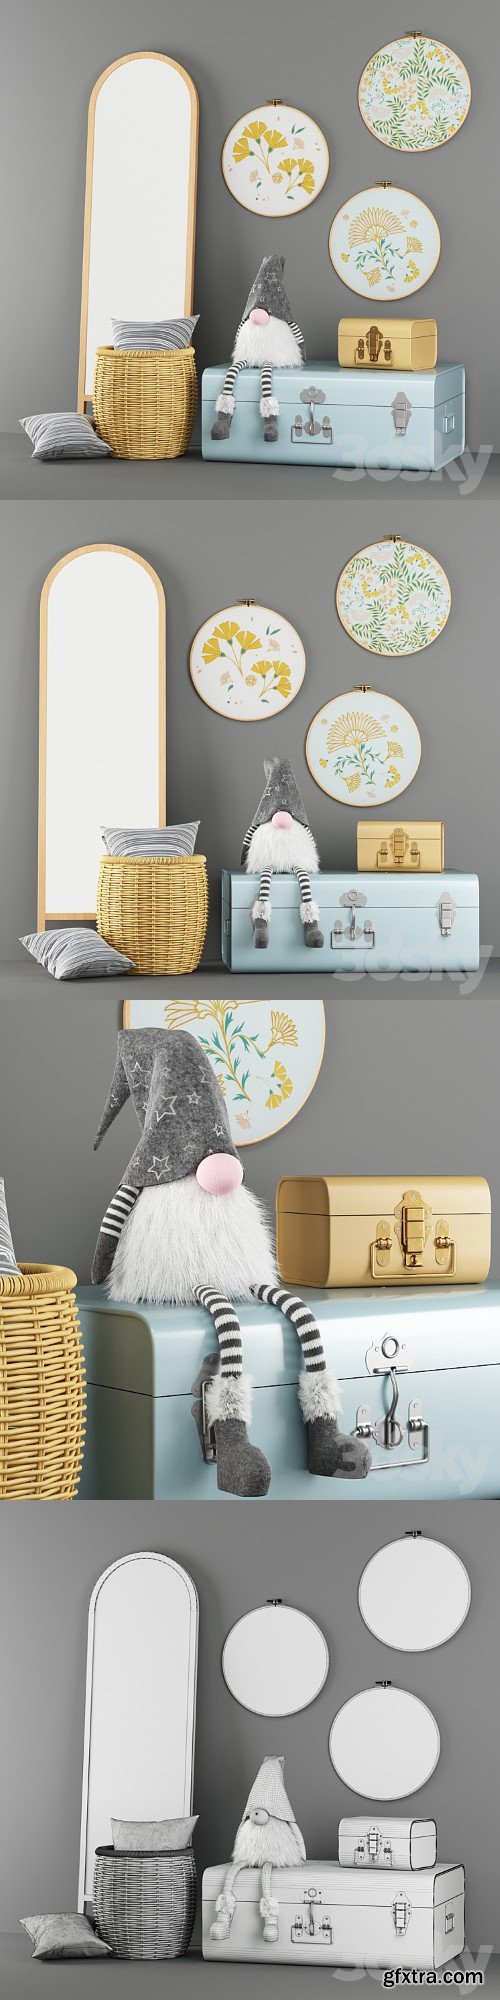 Decorative set for the childrens room La Redoute